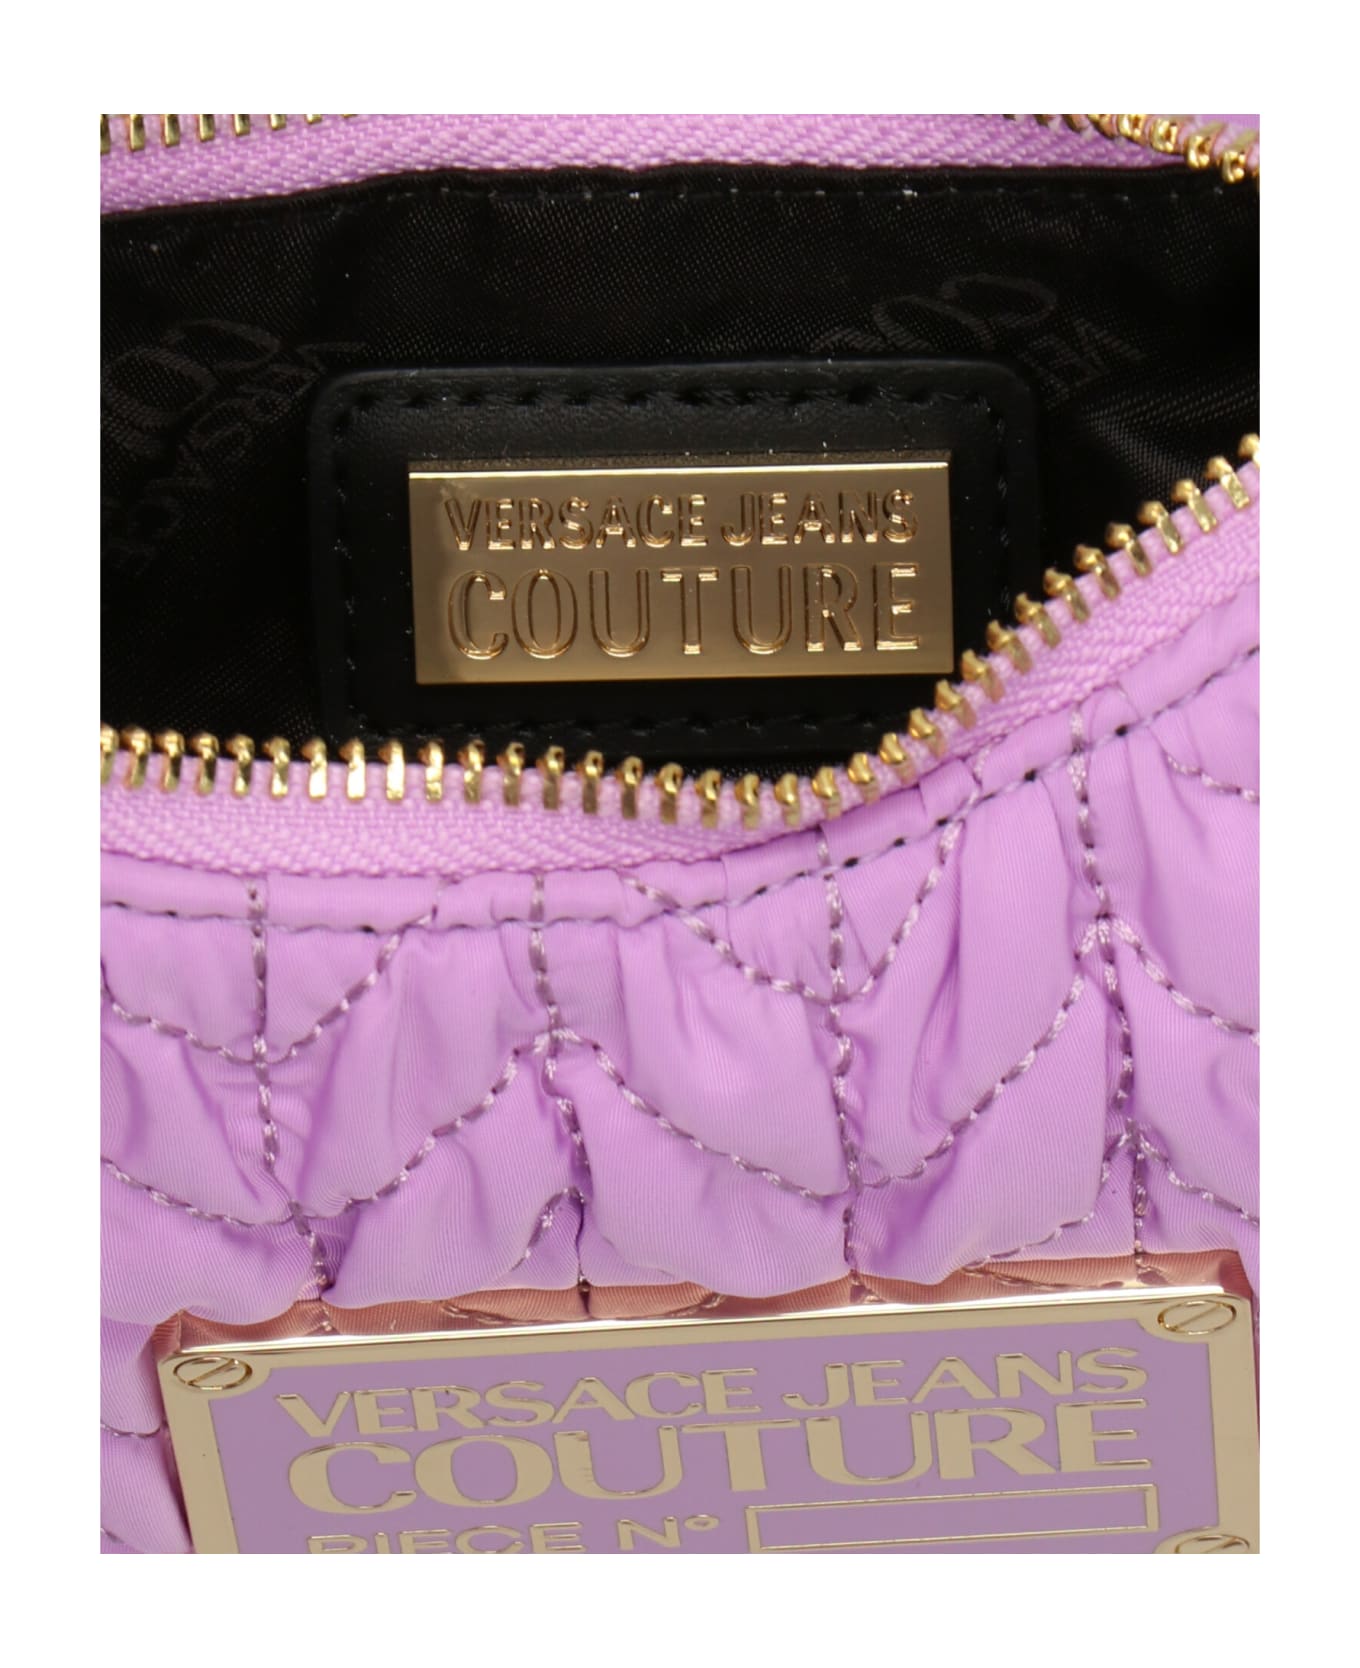 Versace Jeans Couture Bag - Lilac